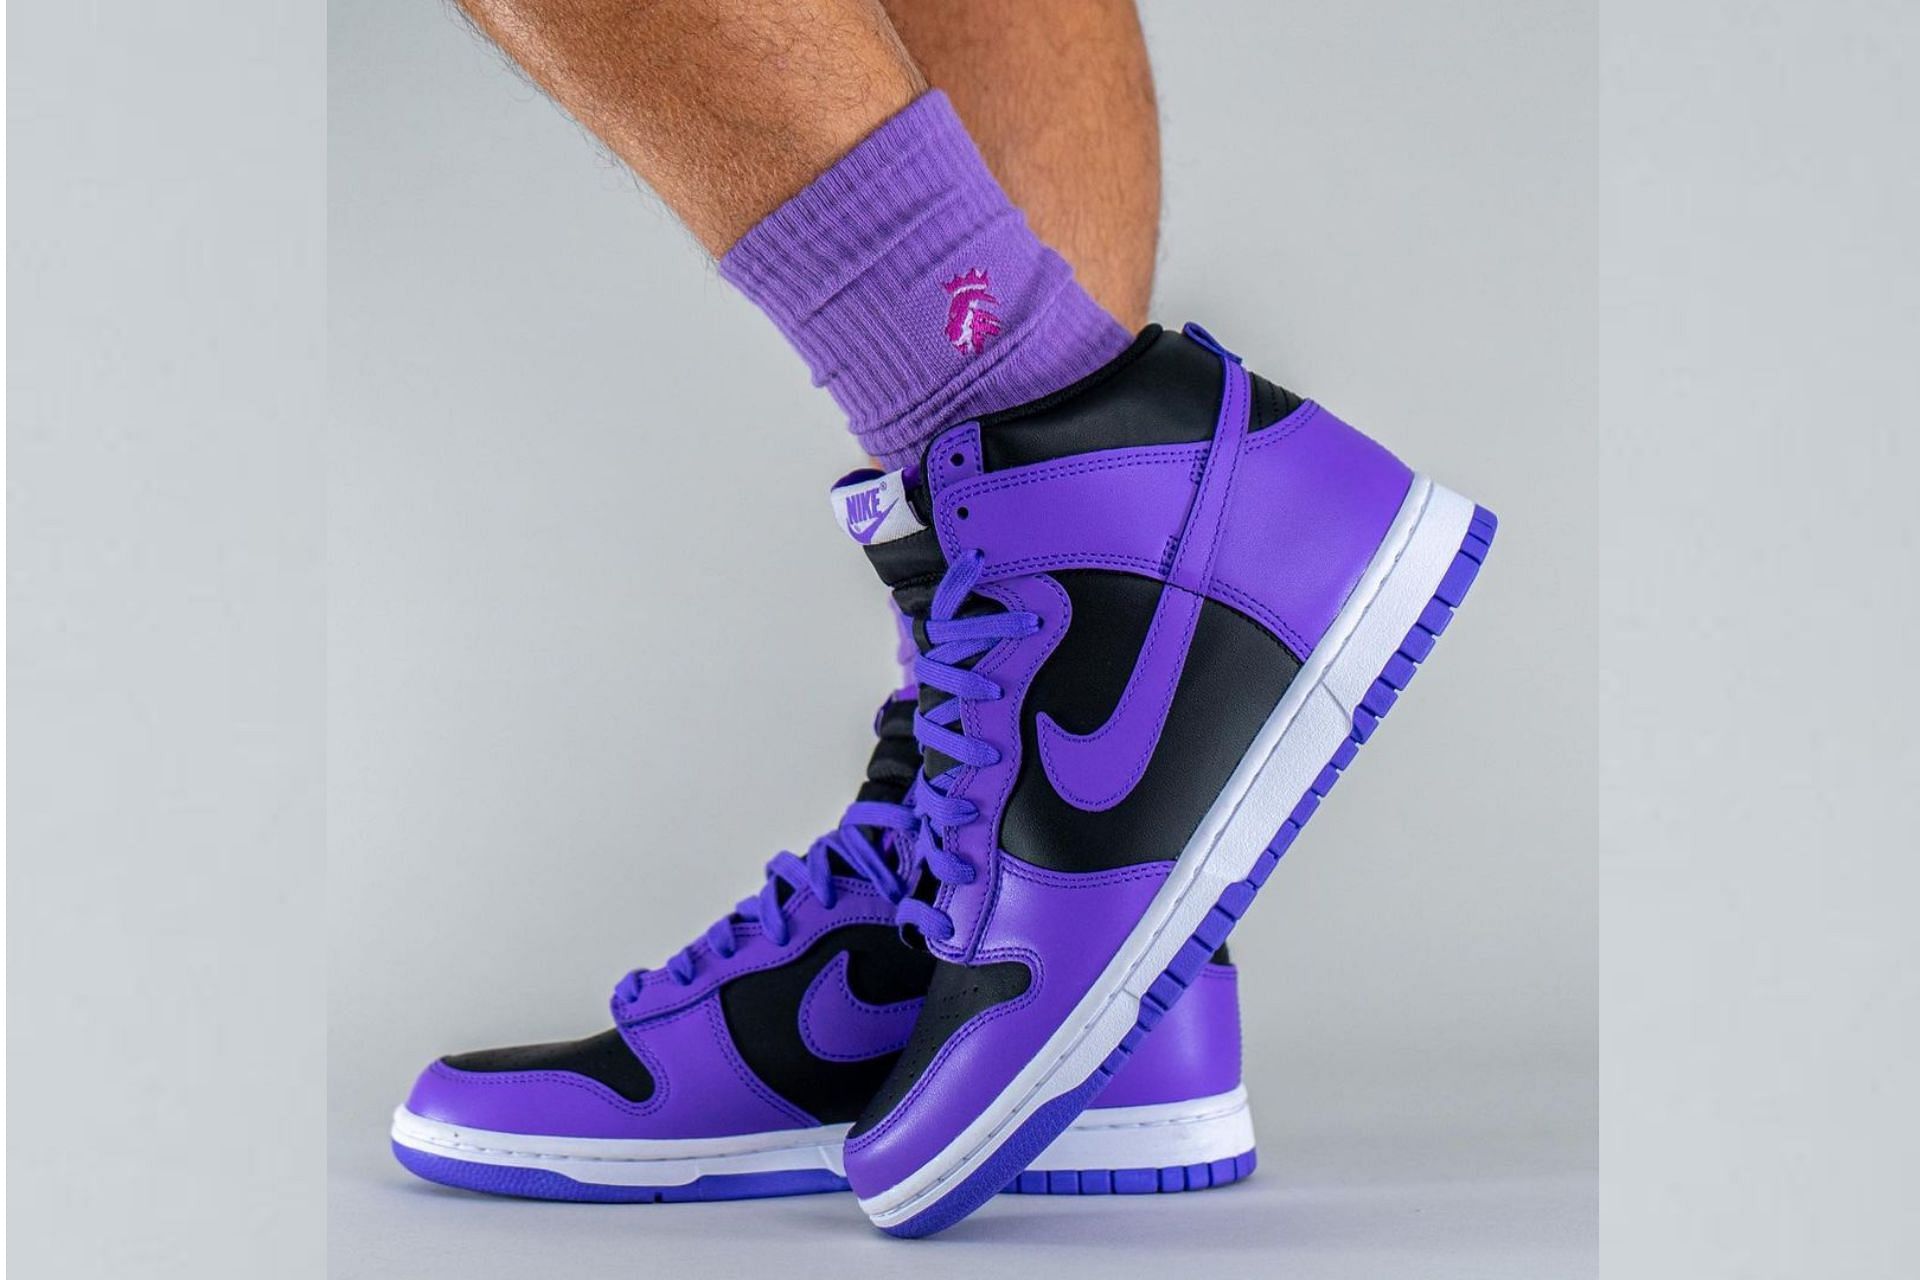 Where to buy Nike Dunk High Purple/Black colorway? Price and more